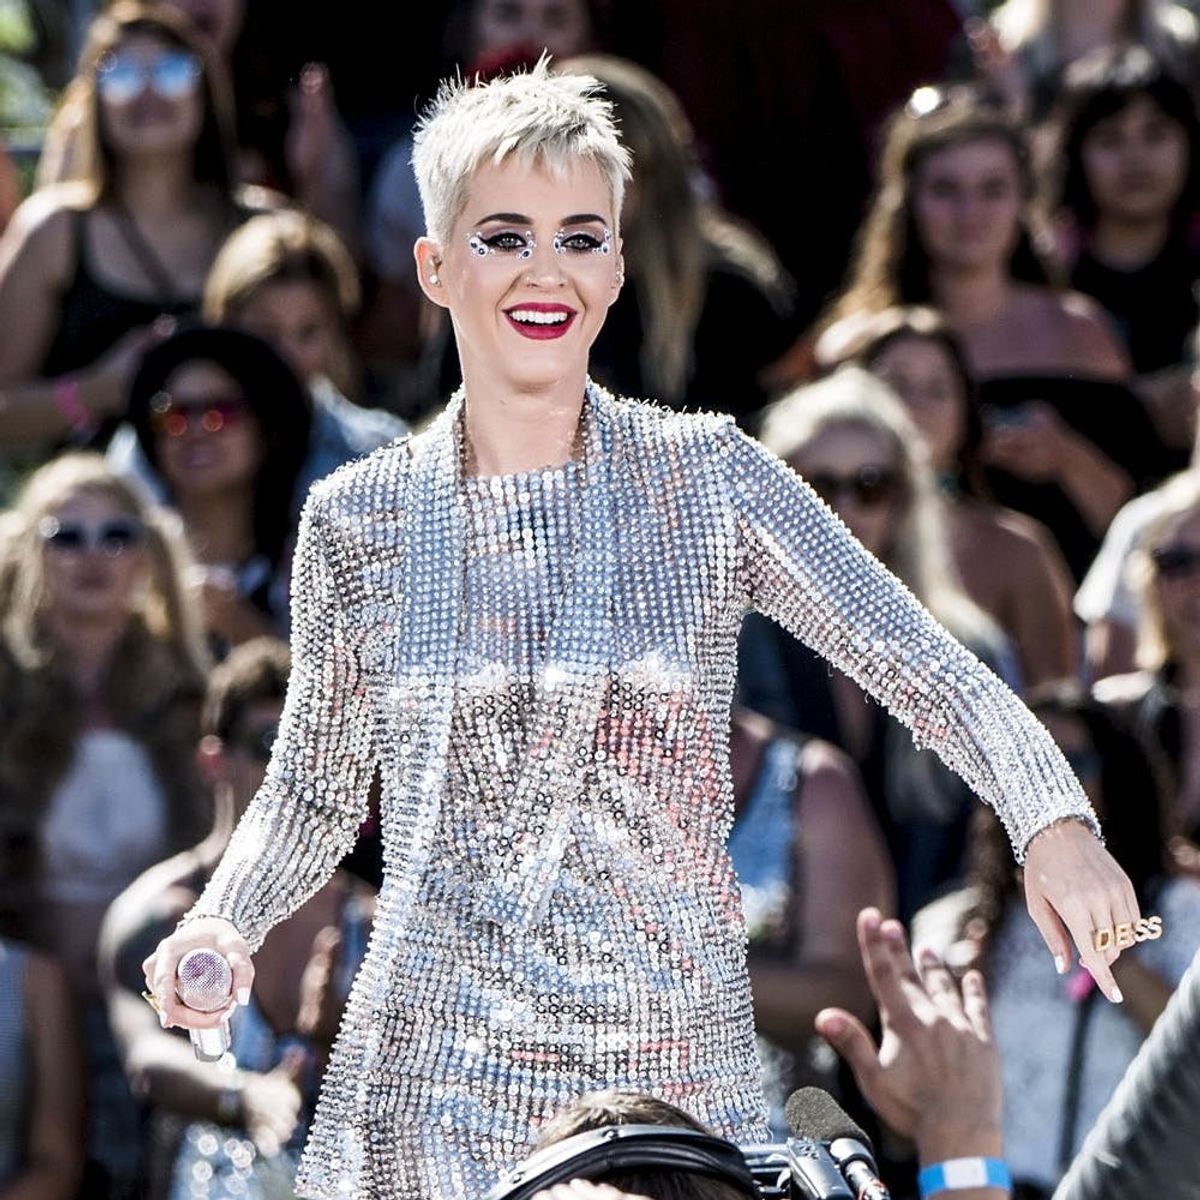 Katy Perry Says All of the Awards She’s Won “Are Fake”